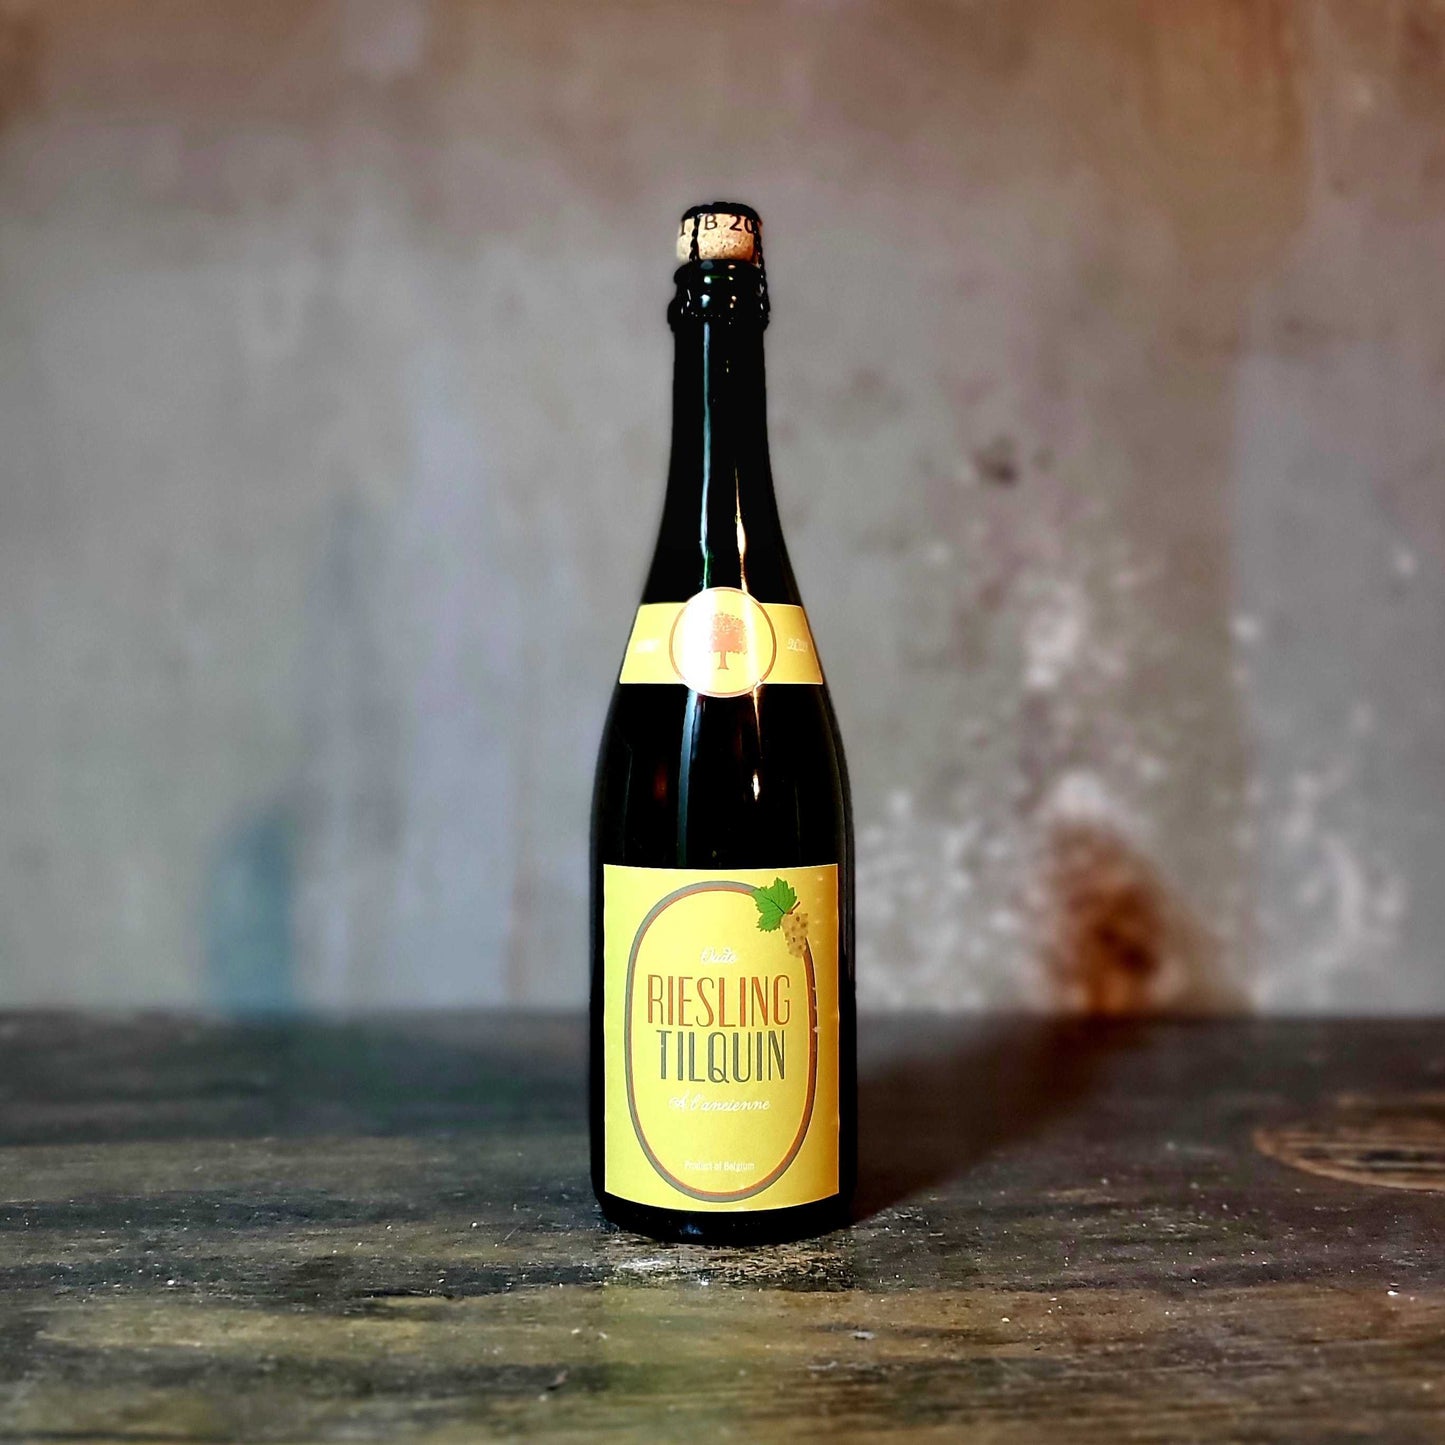 Oude Riesling Tilquin à l'ancienne (2020/21)